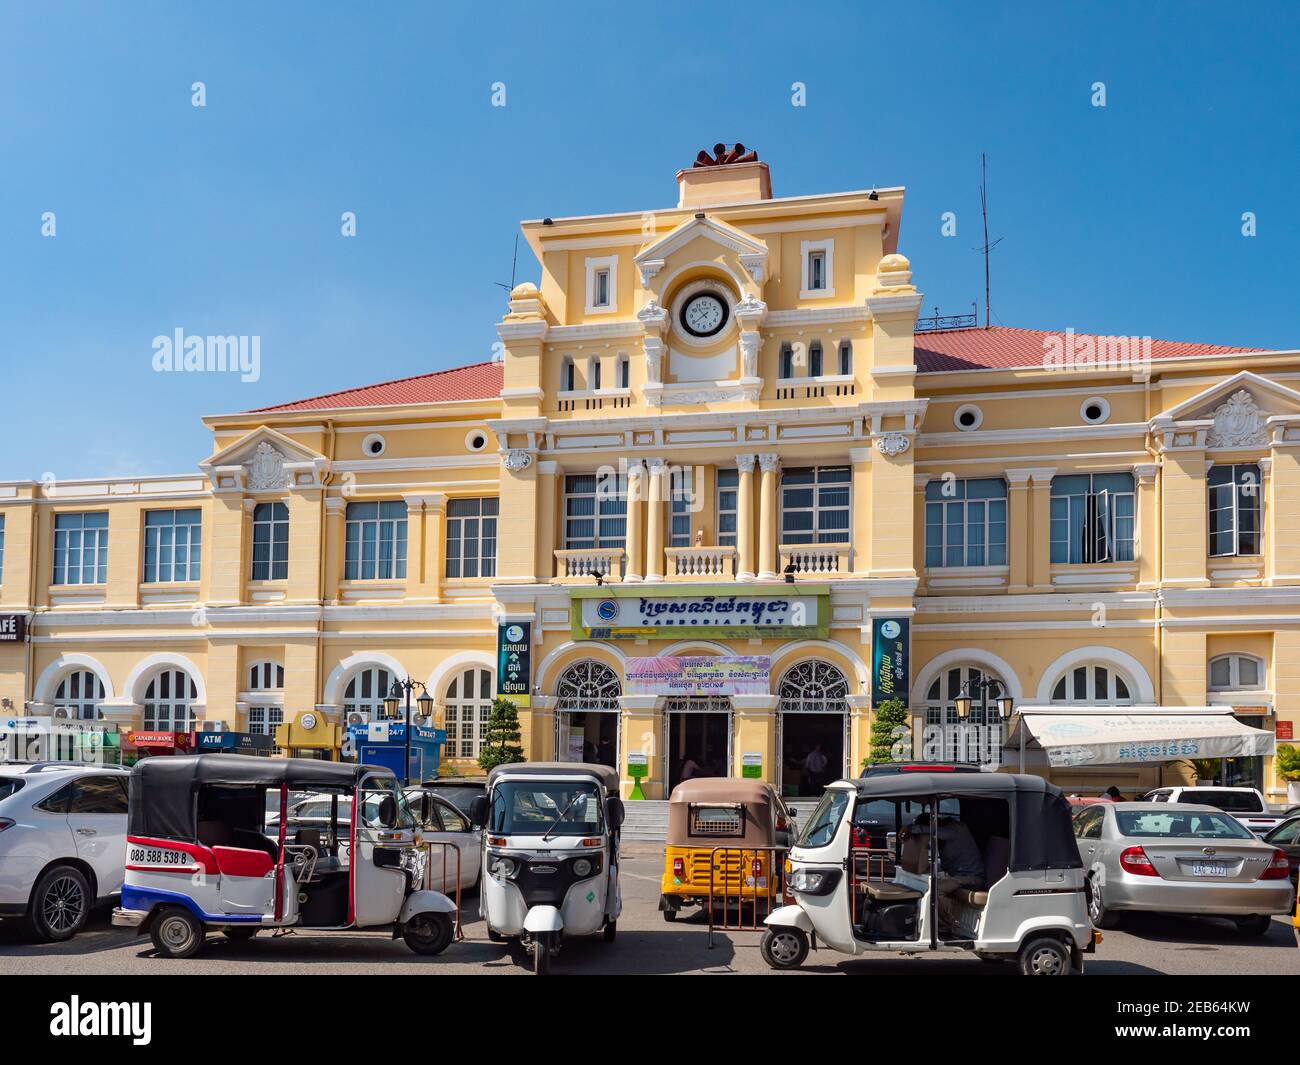 The main post office building in Phnom Penh, Cambodia, originally built by the French during colonial times. Stock Photo